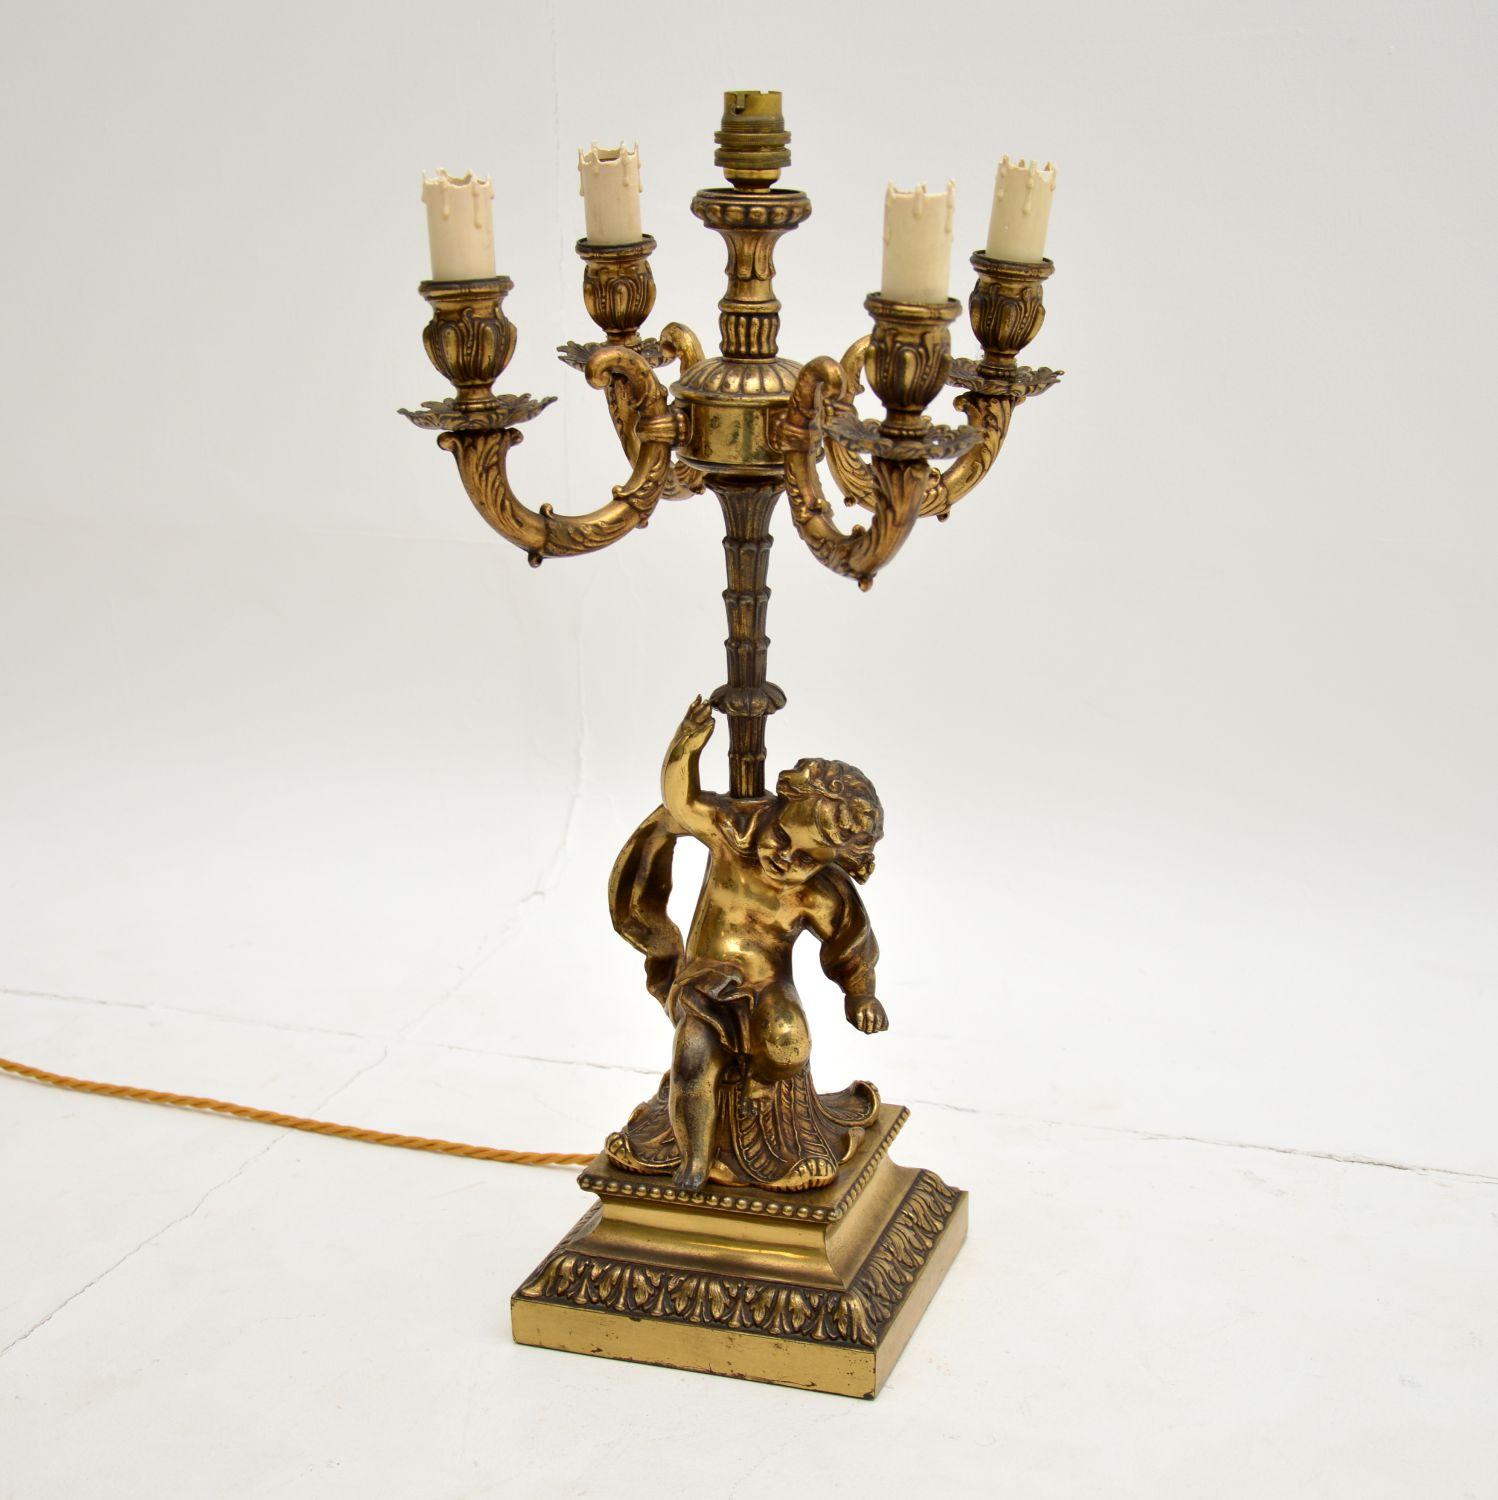 A stunning antique gilt metal table lamp, made in France and dating from the 1910-20 period.

This is of extremely fine quality, with a finely cast and characterful cherub supporting the main column. There are four smaller sockets supported by